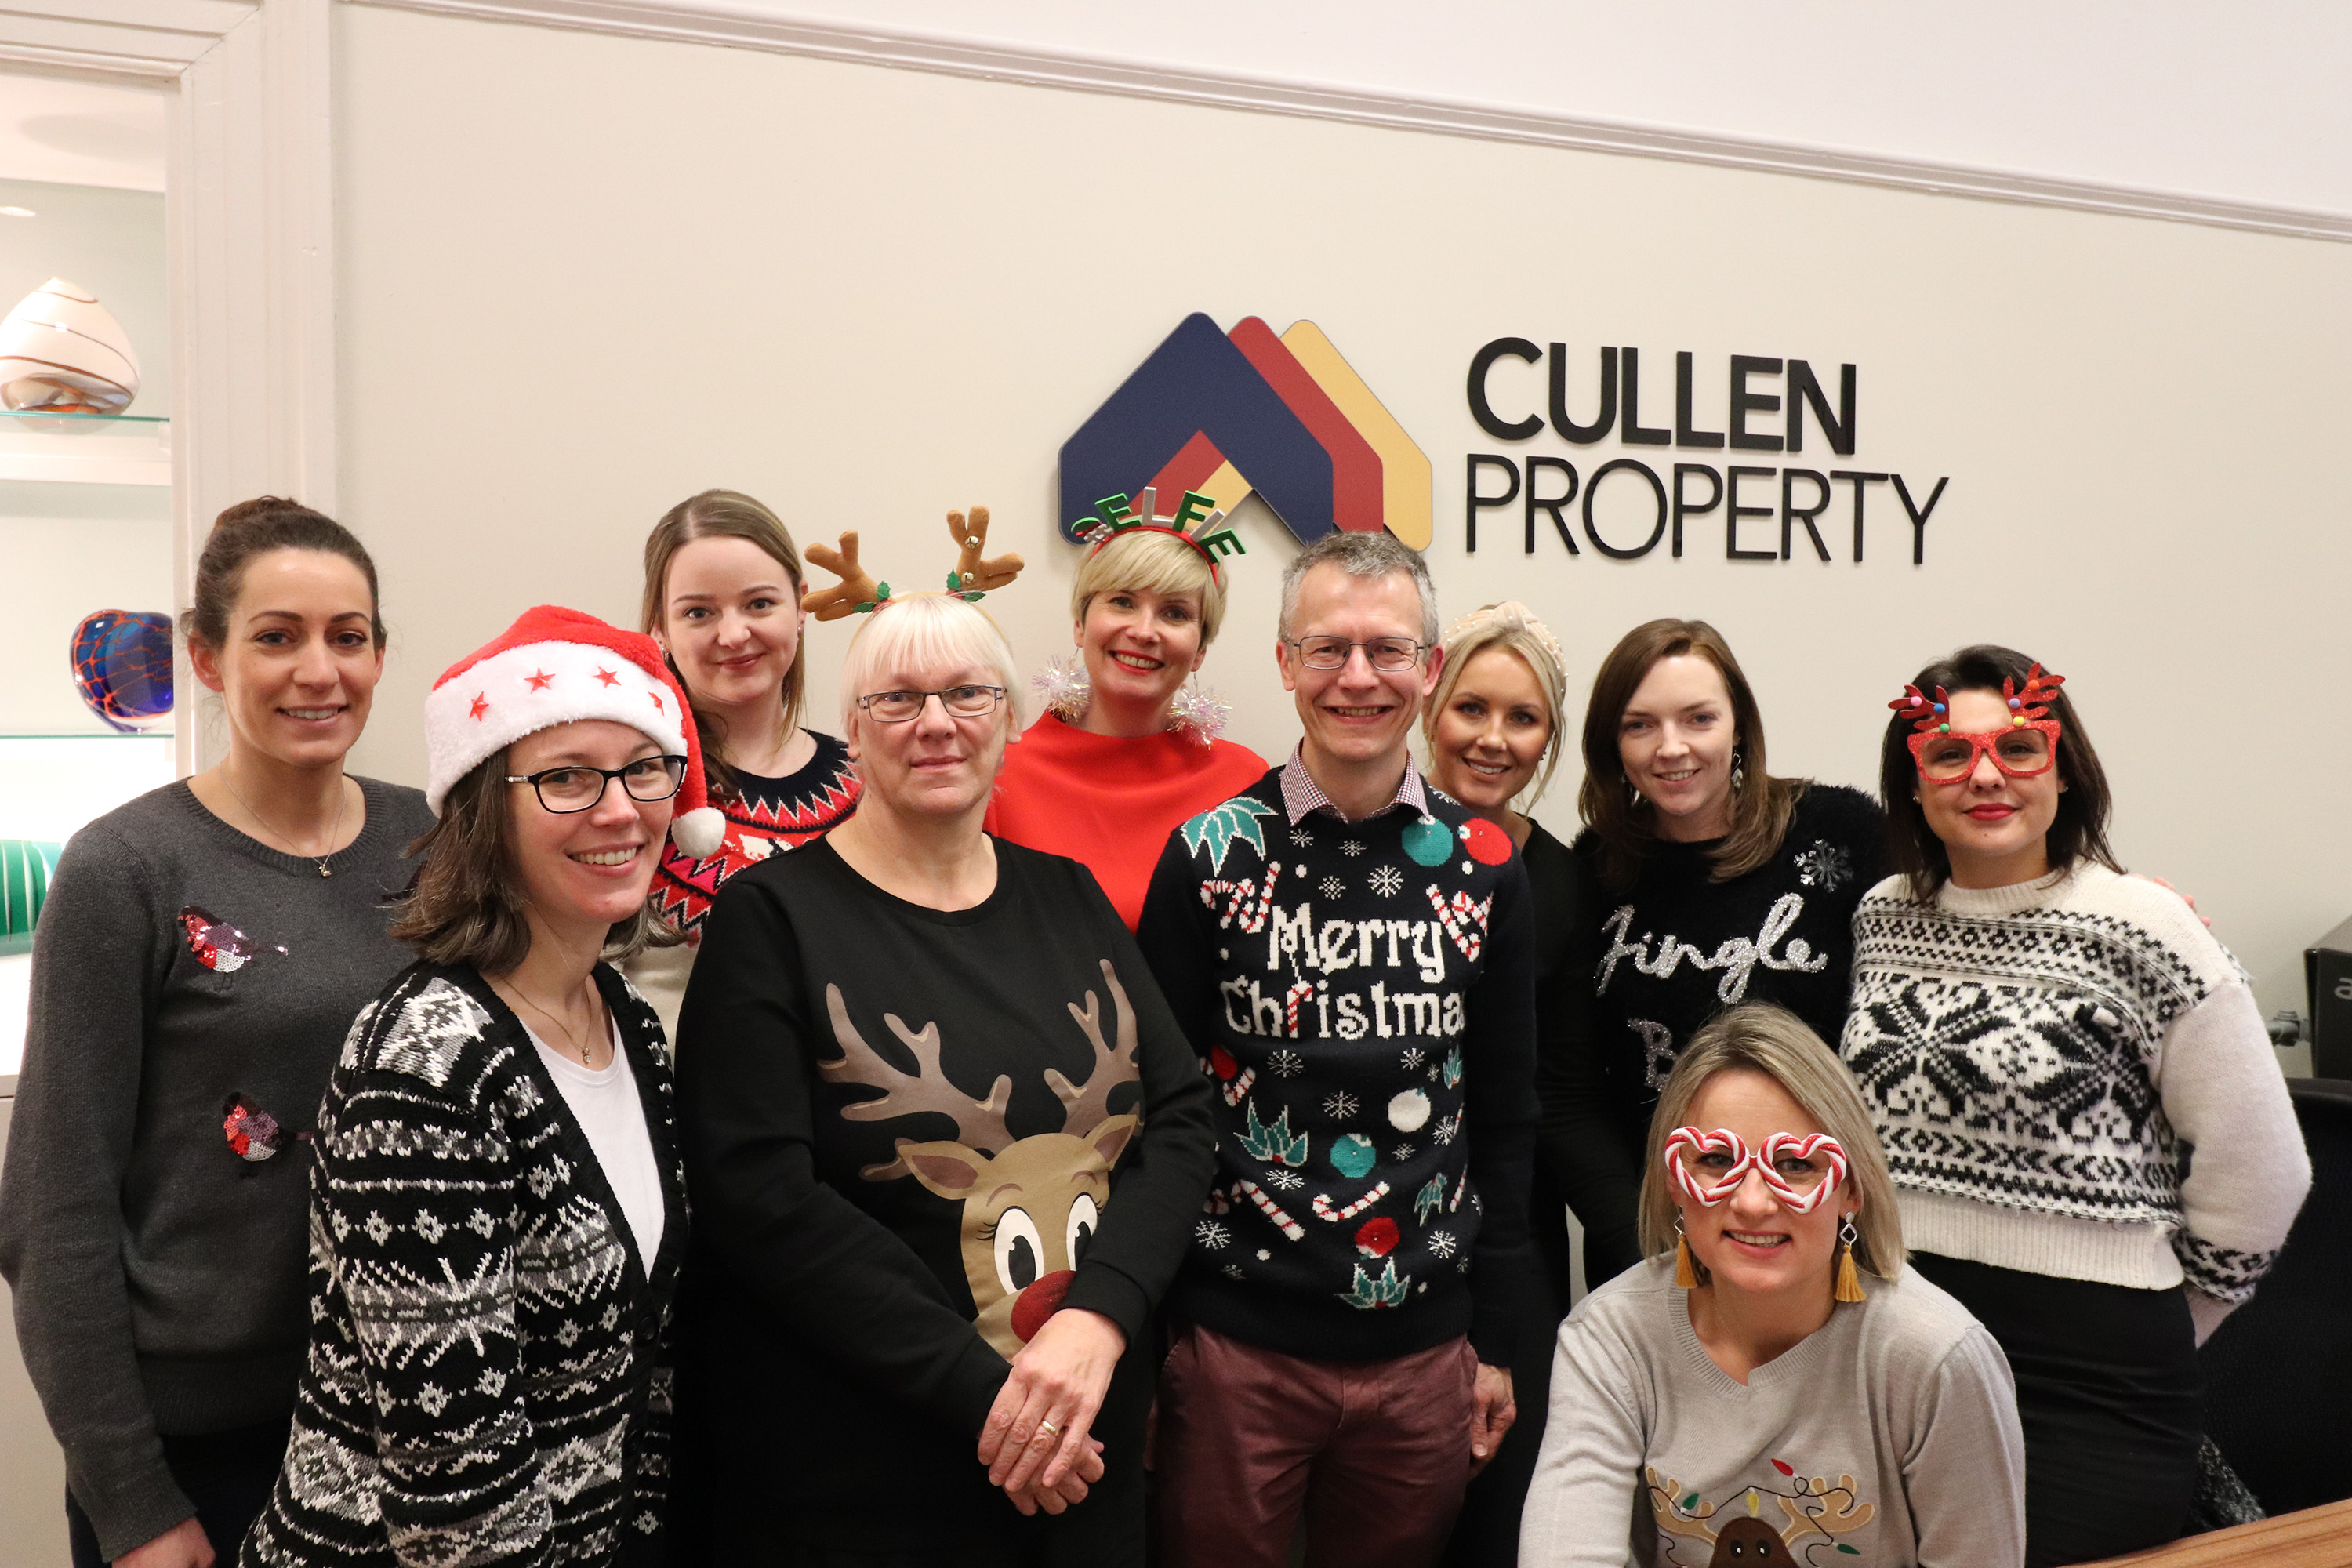 Happy Holidays from all at Cullen Property